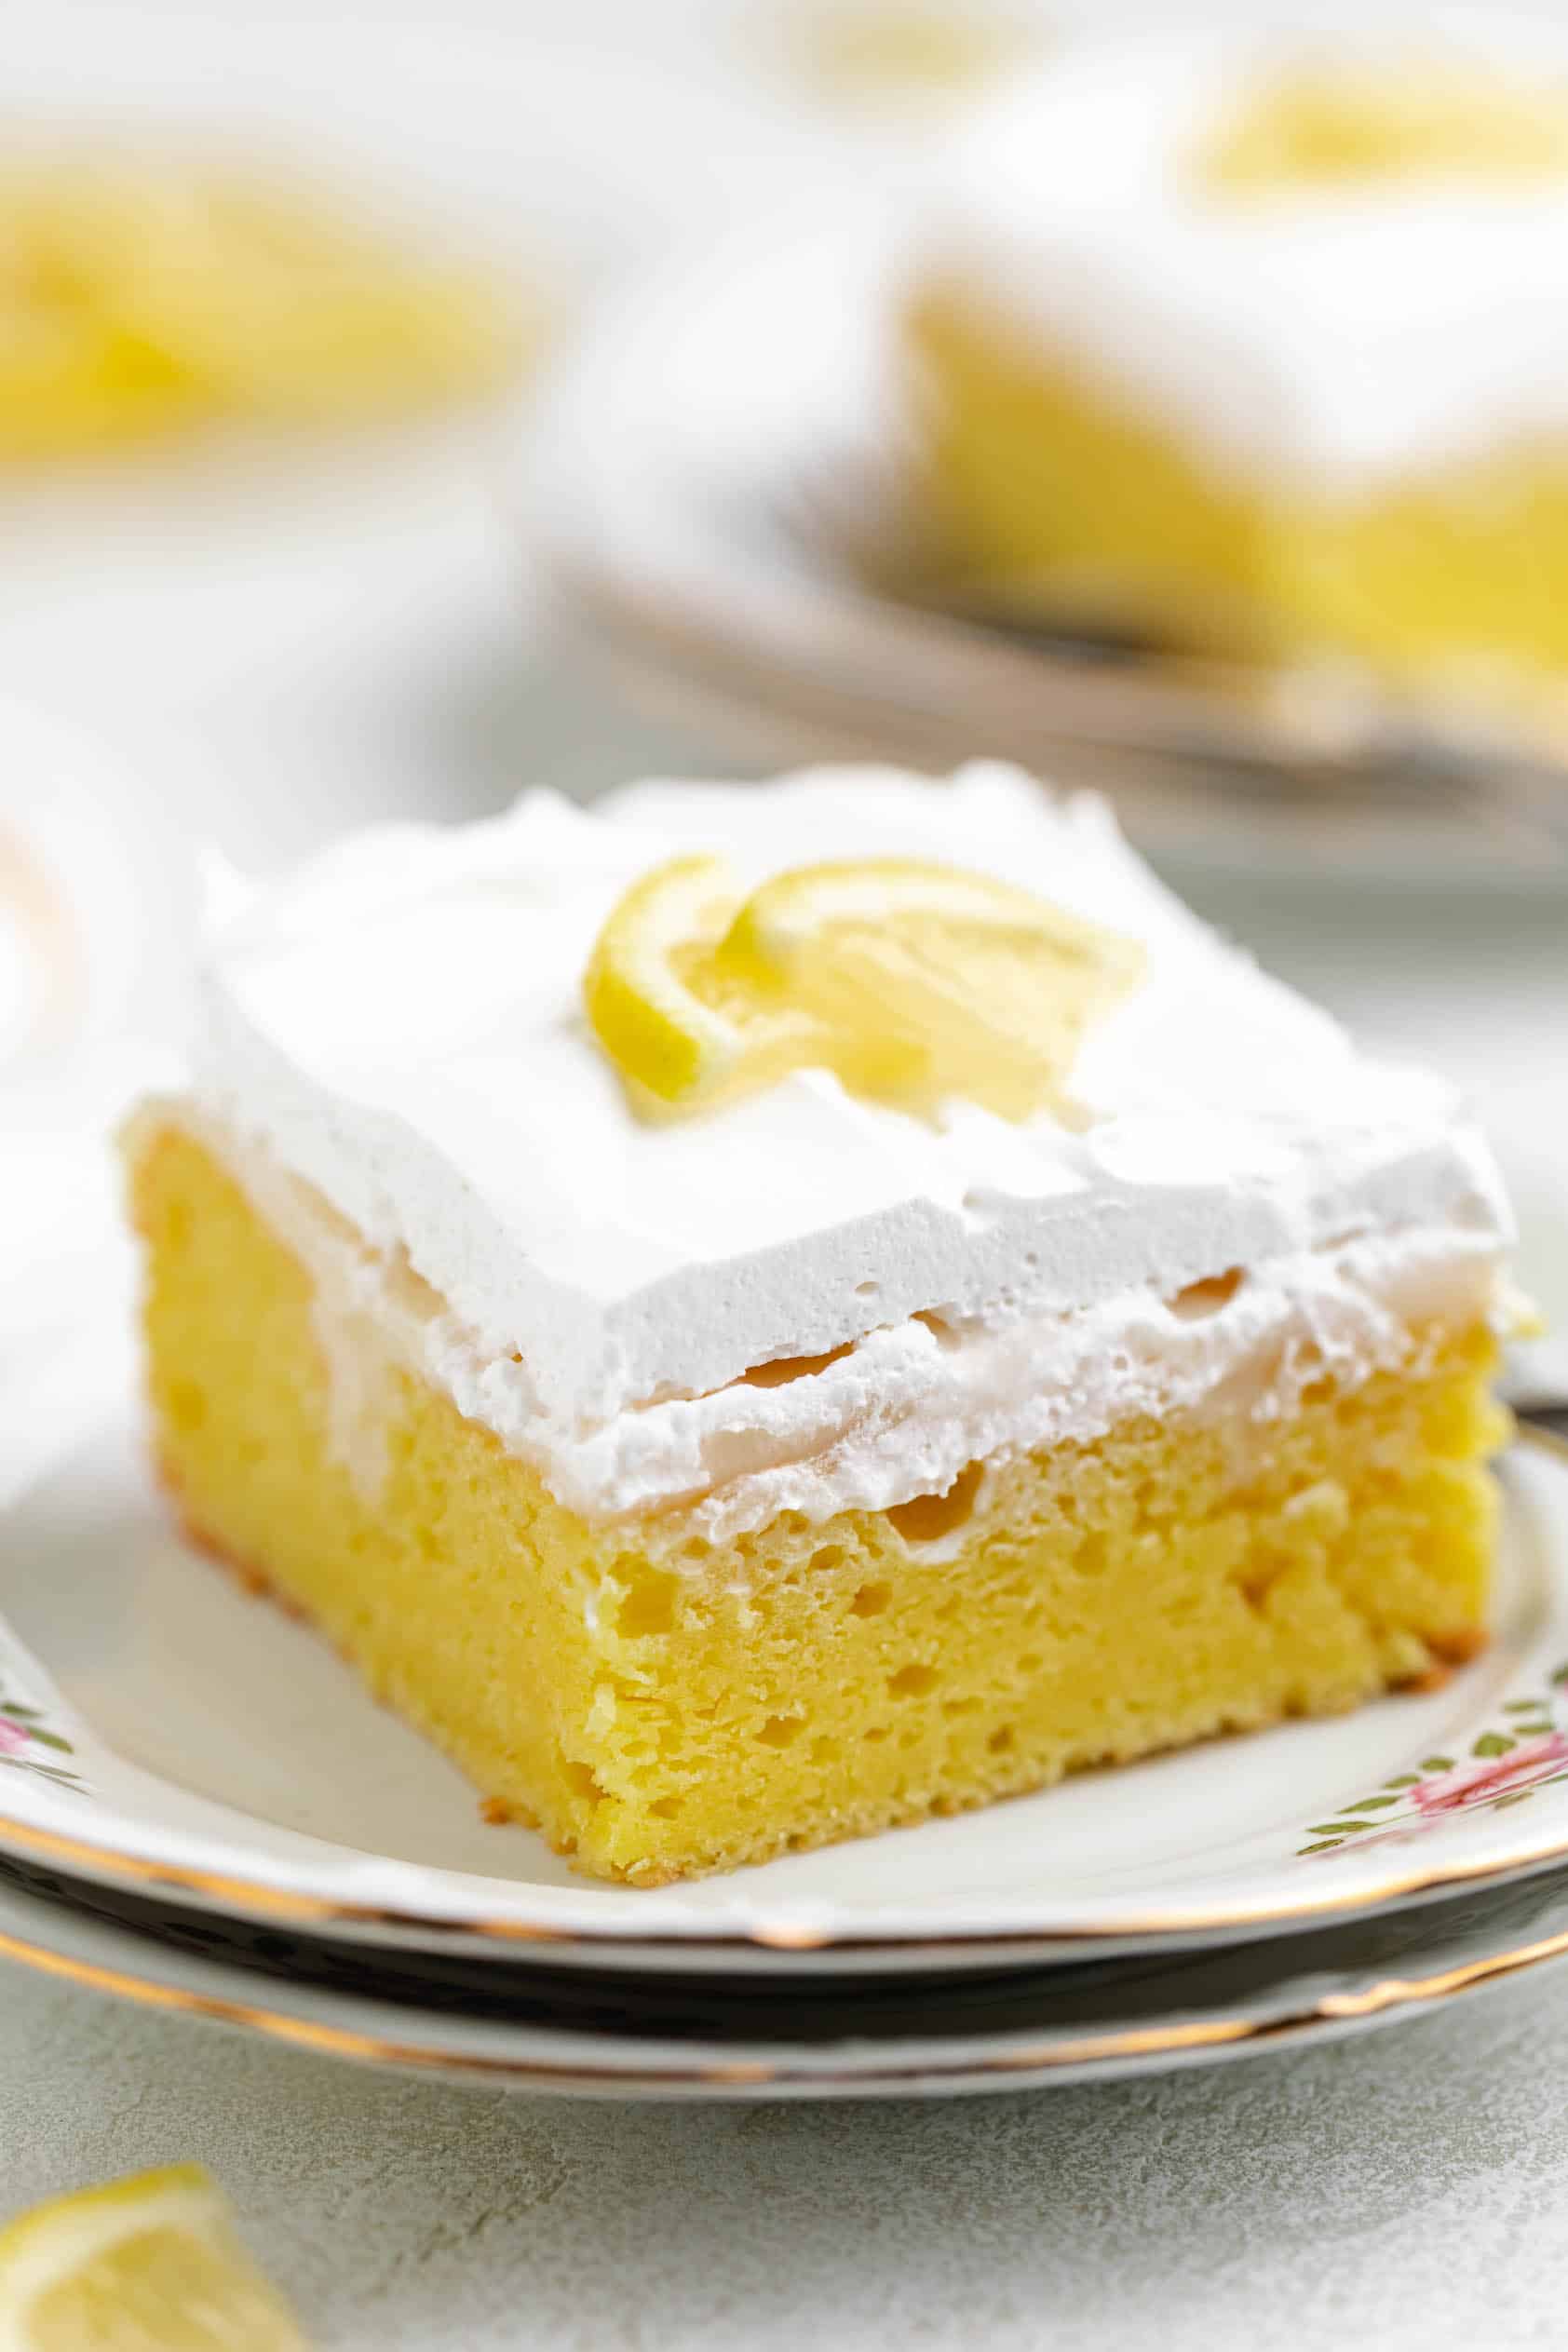 Close up view of lemon cake with whipped cream frosting.